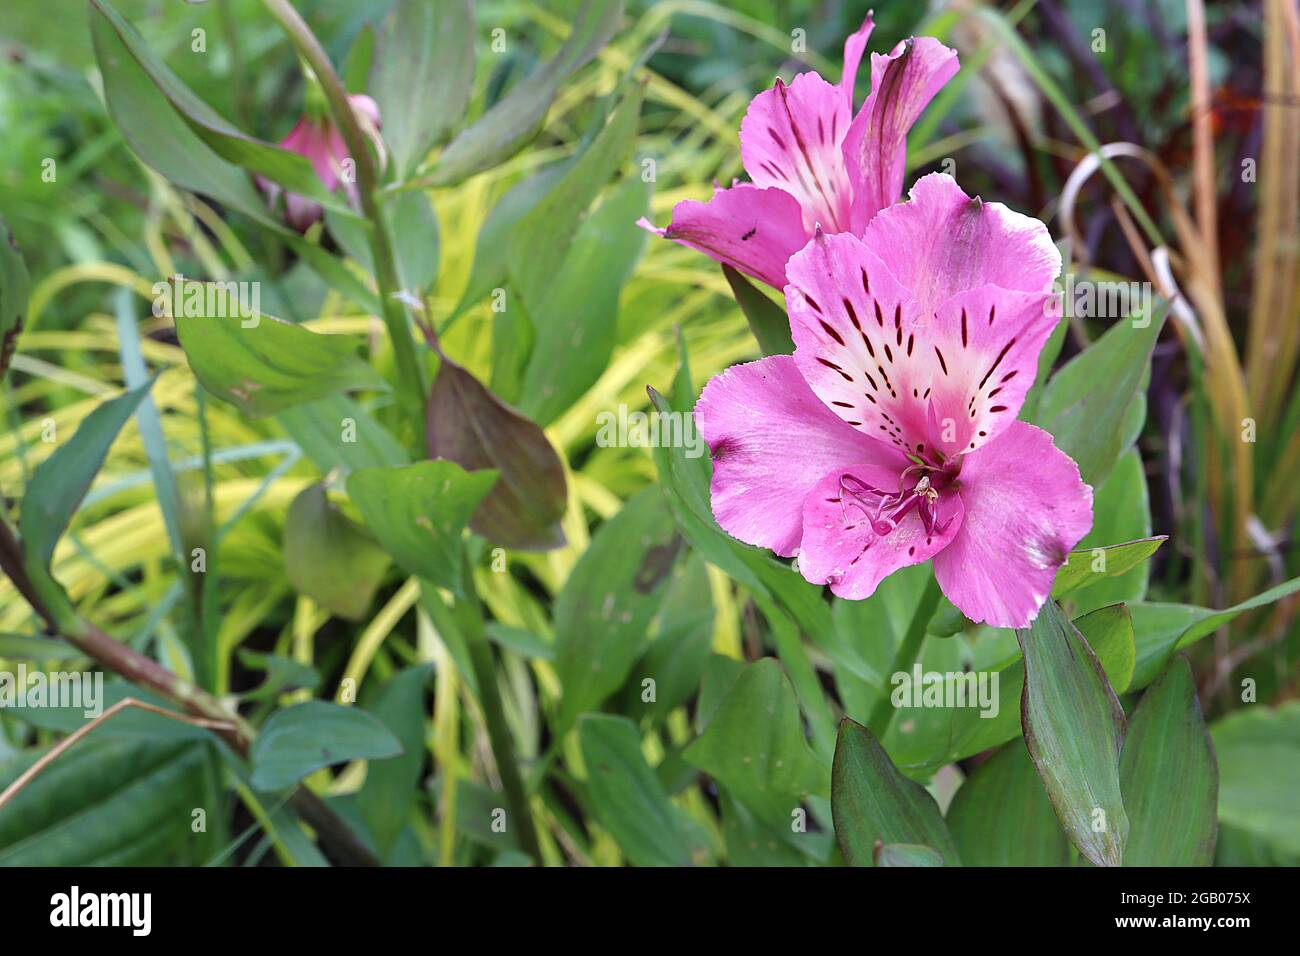 Alstroemeria ‘Summer Saint’ Peruvian lily Summer Saint – deep pink funnel-shaped flowers with white halo and brown flecks,  June, England, UK Stock Photo